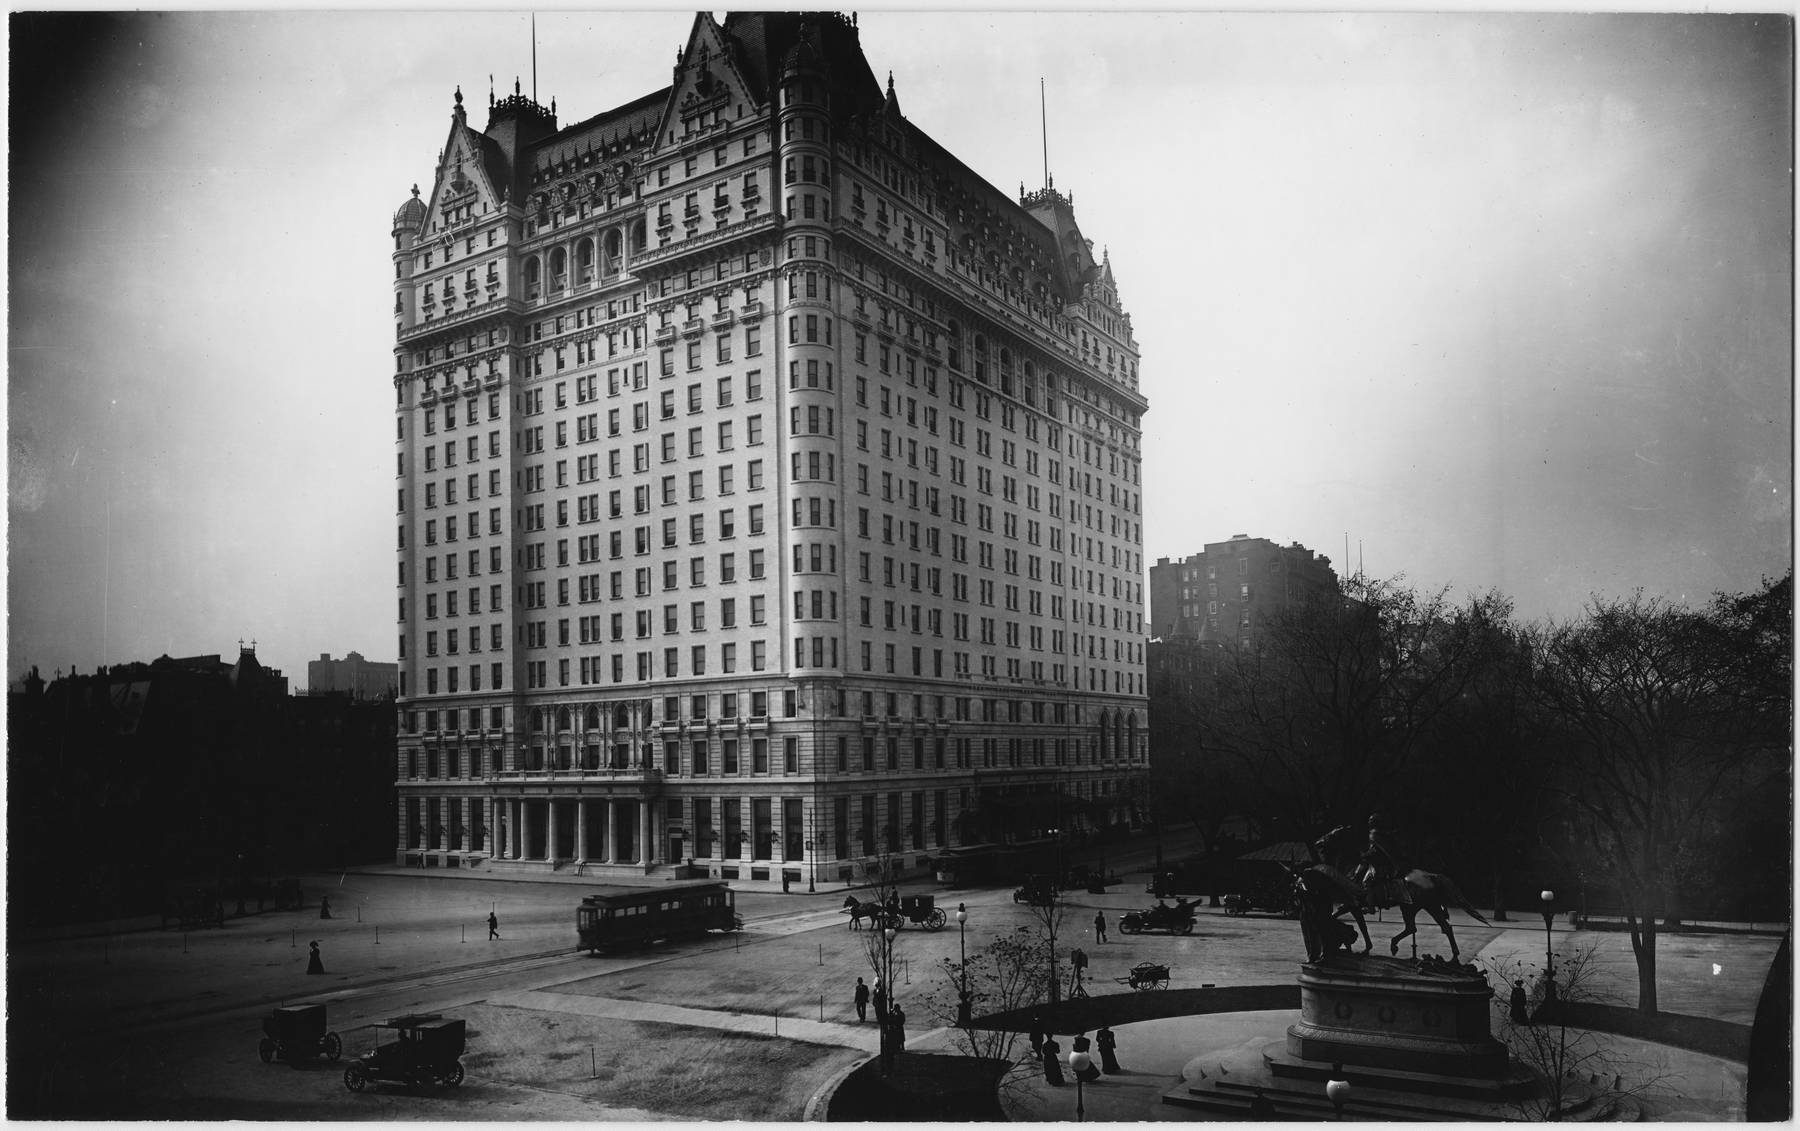 b&w photo of exterior of The Plaza Hotel with some people, horse carriages and cars